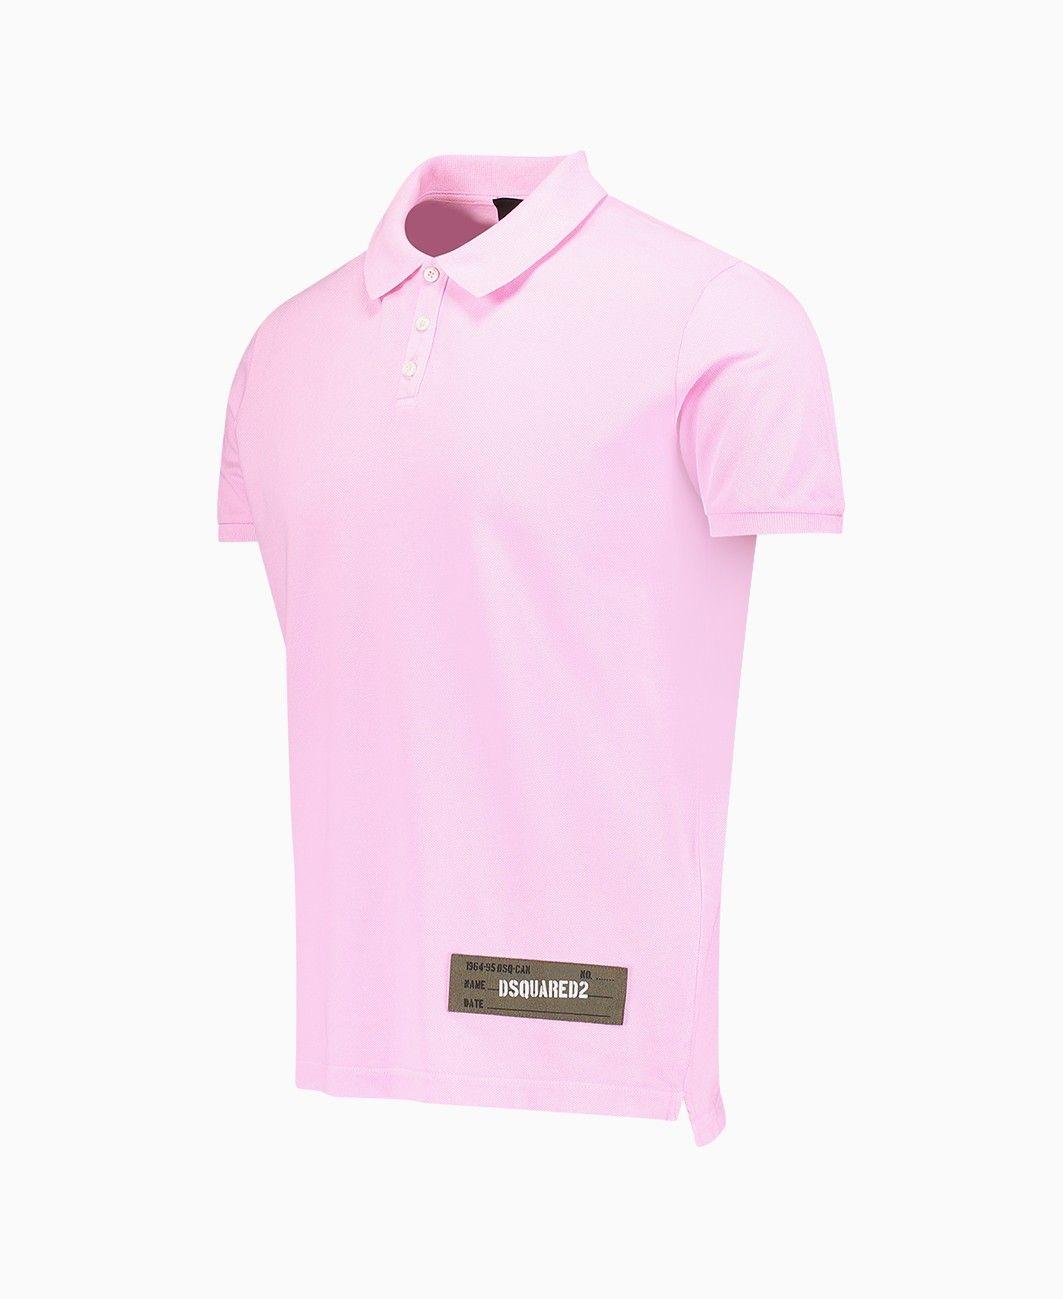 Pink Polo Logo - Dsquared2 - Tape Logo Washed Polo - Pink